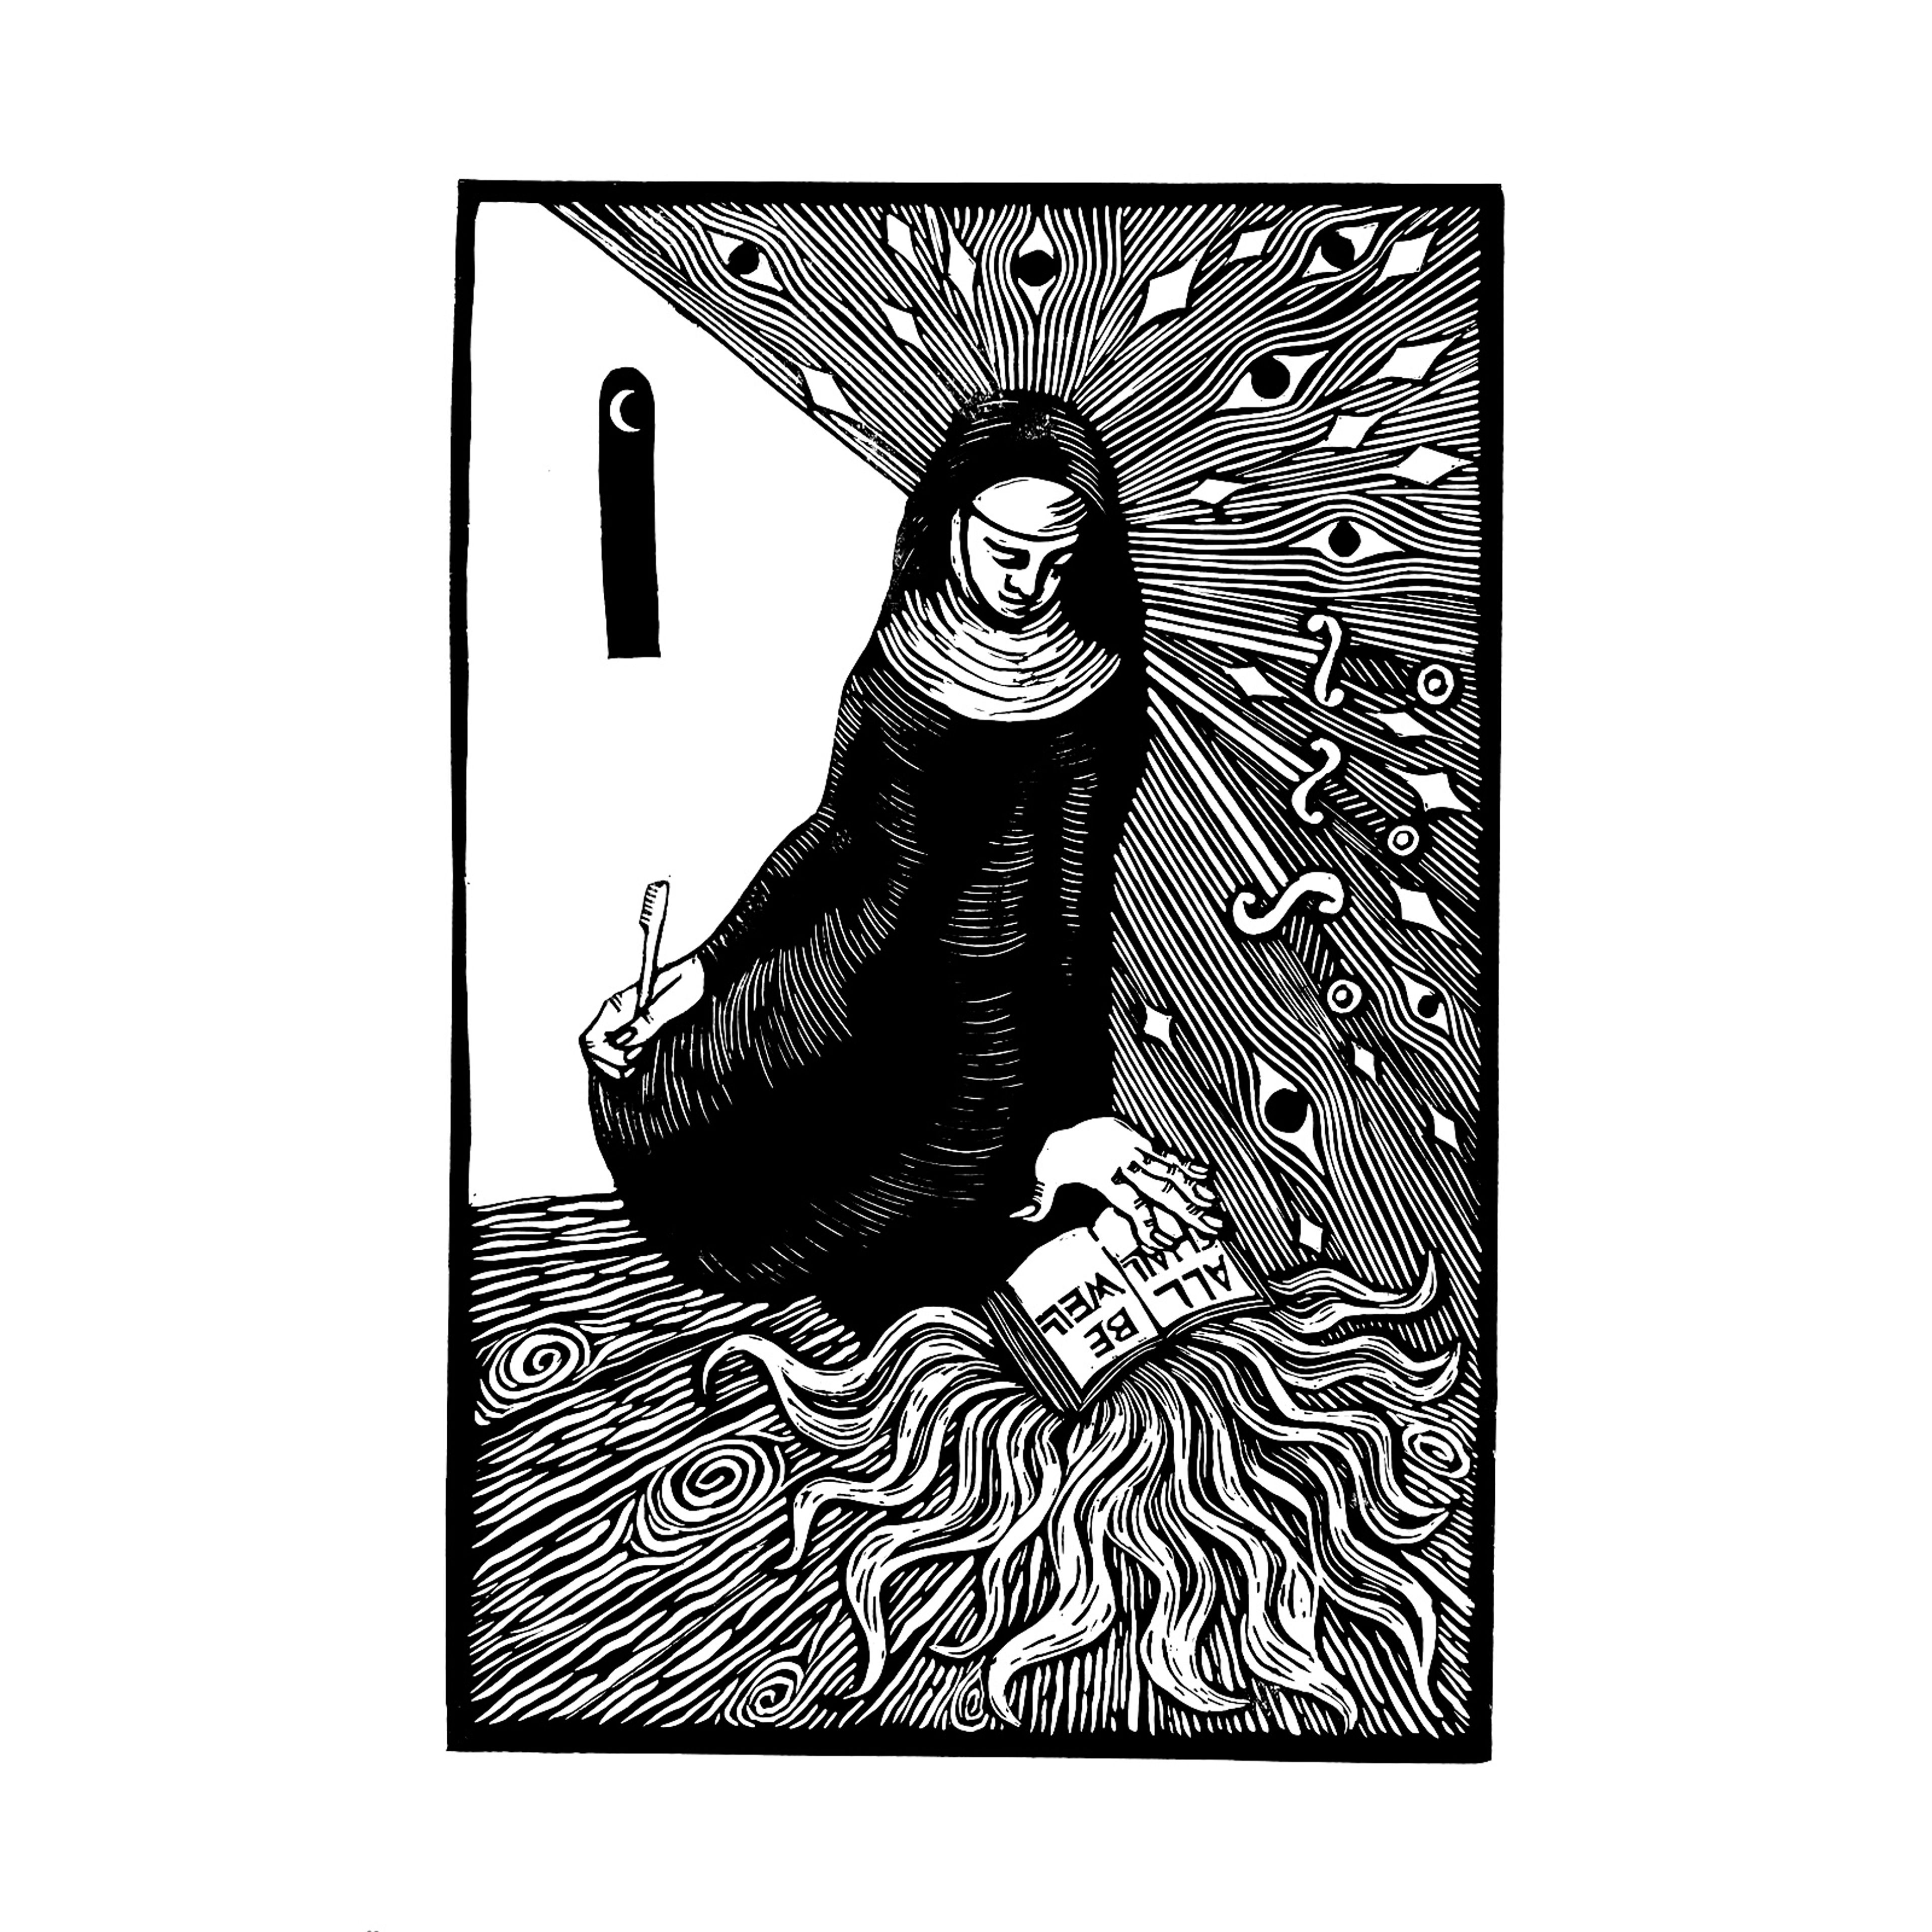 black and white graphic print; woman in religious Christian clothing with head covering kneeling with hand on book which reads ALL SHALL BE WELL; Divine light emanating from her